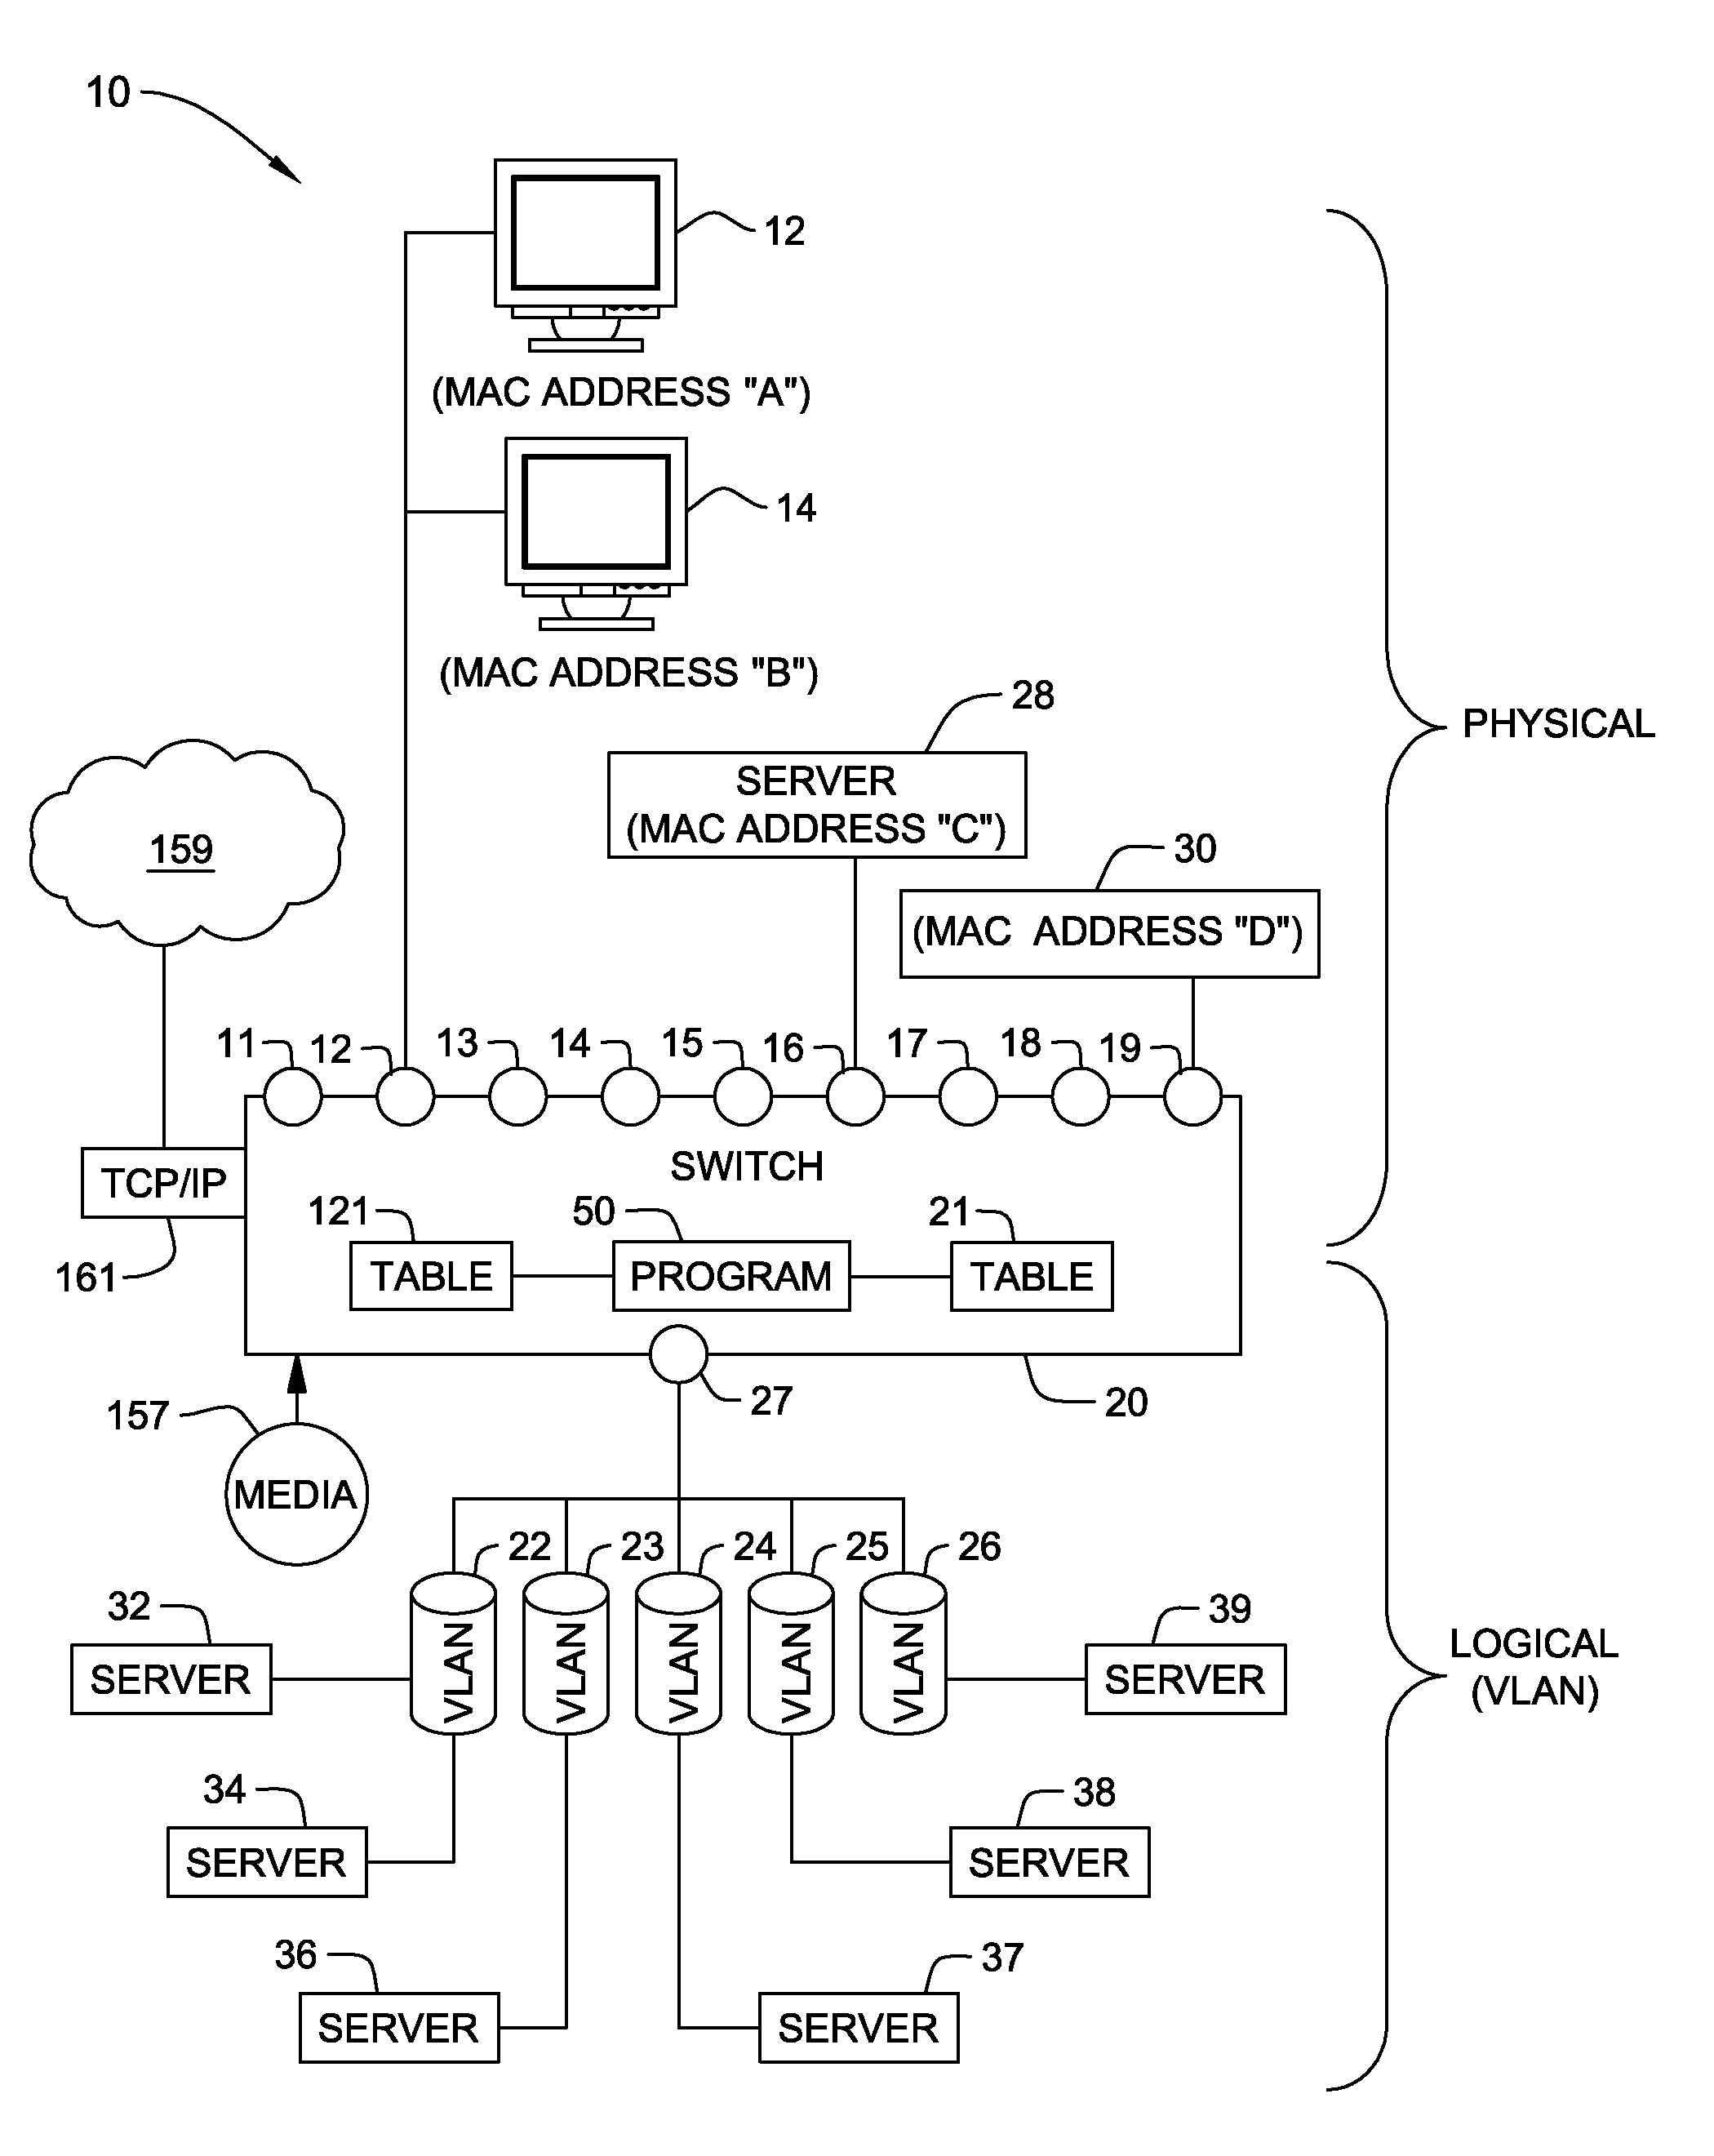 System, method and program to control access to virtual LAN via a switch